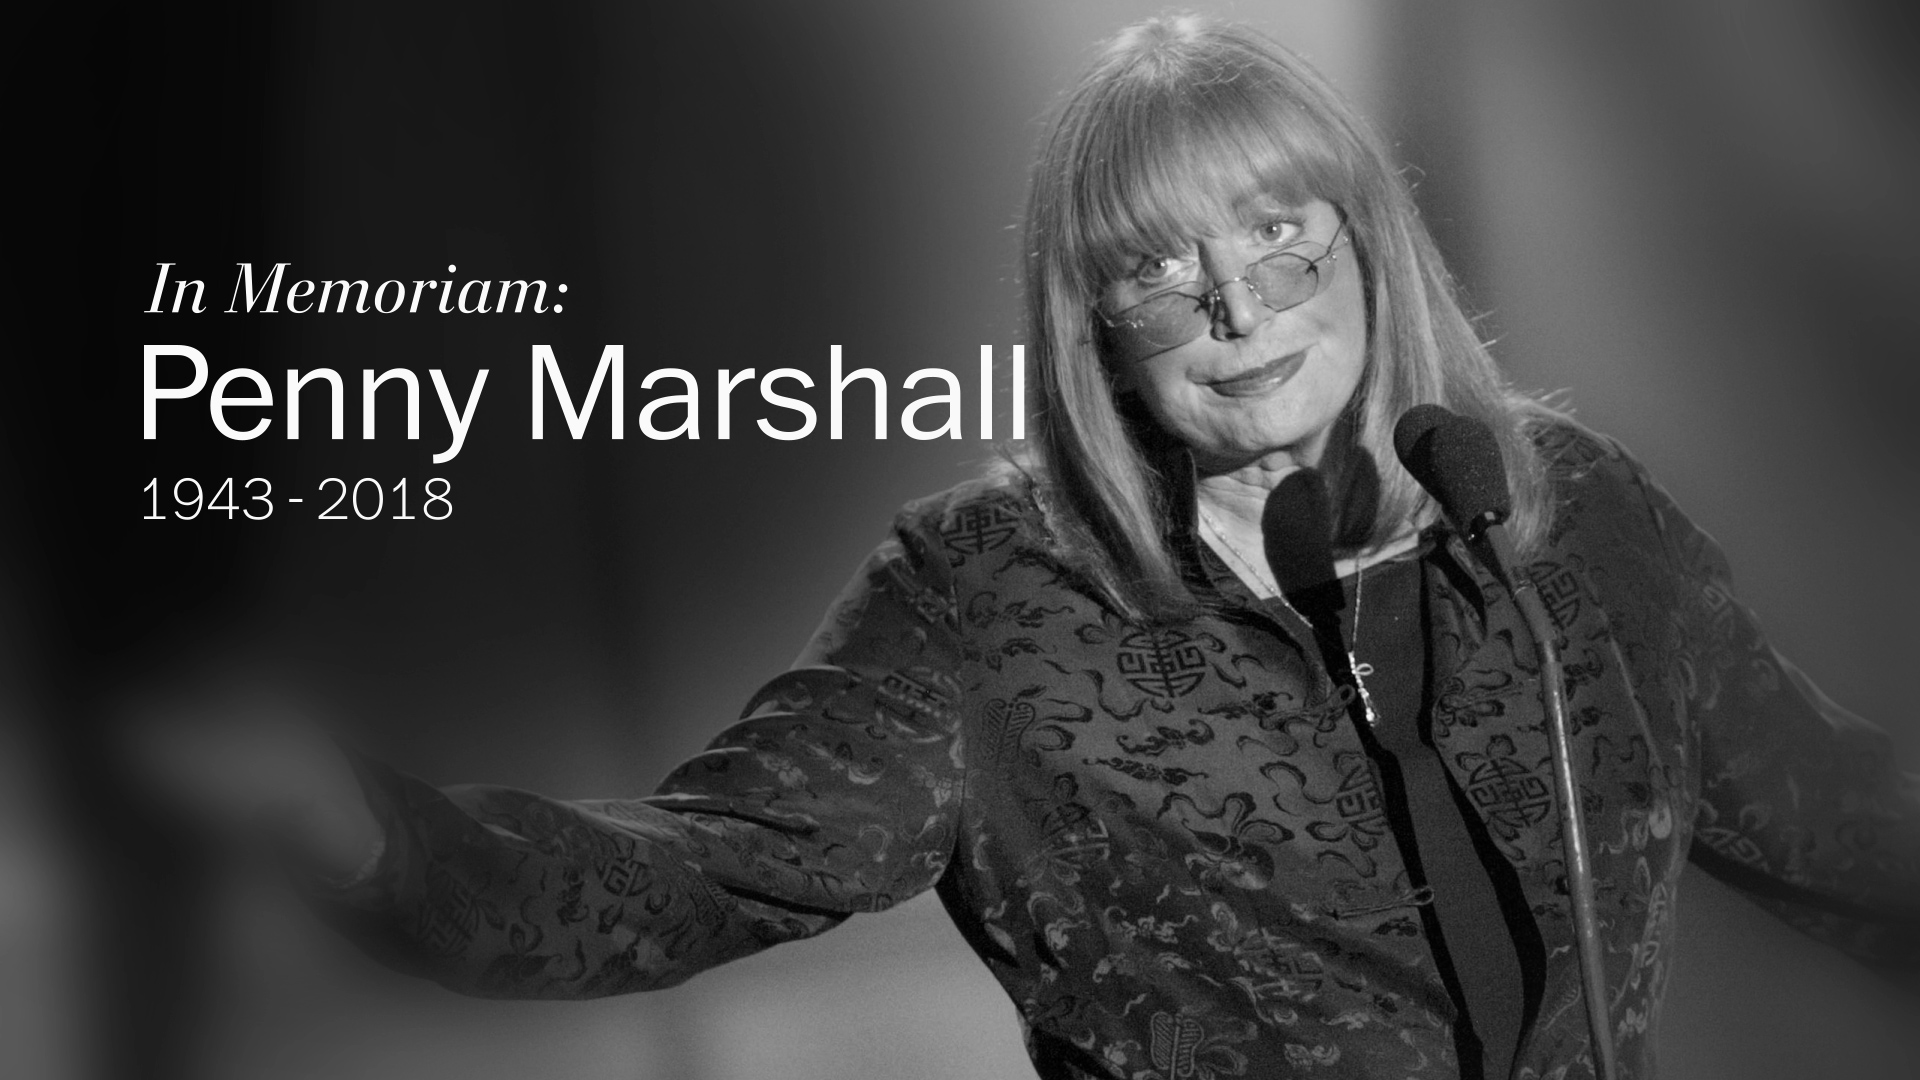 Penny Marshall, sitcom star and hitmaking director of A League of Their Own, dies at 75